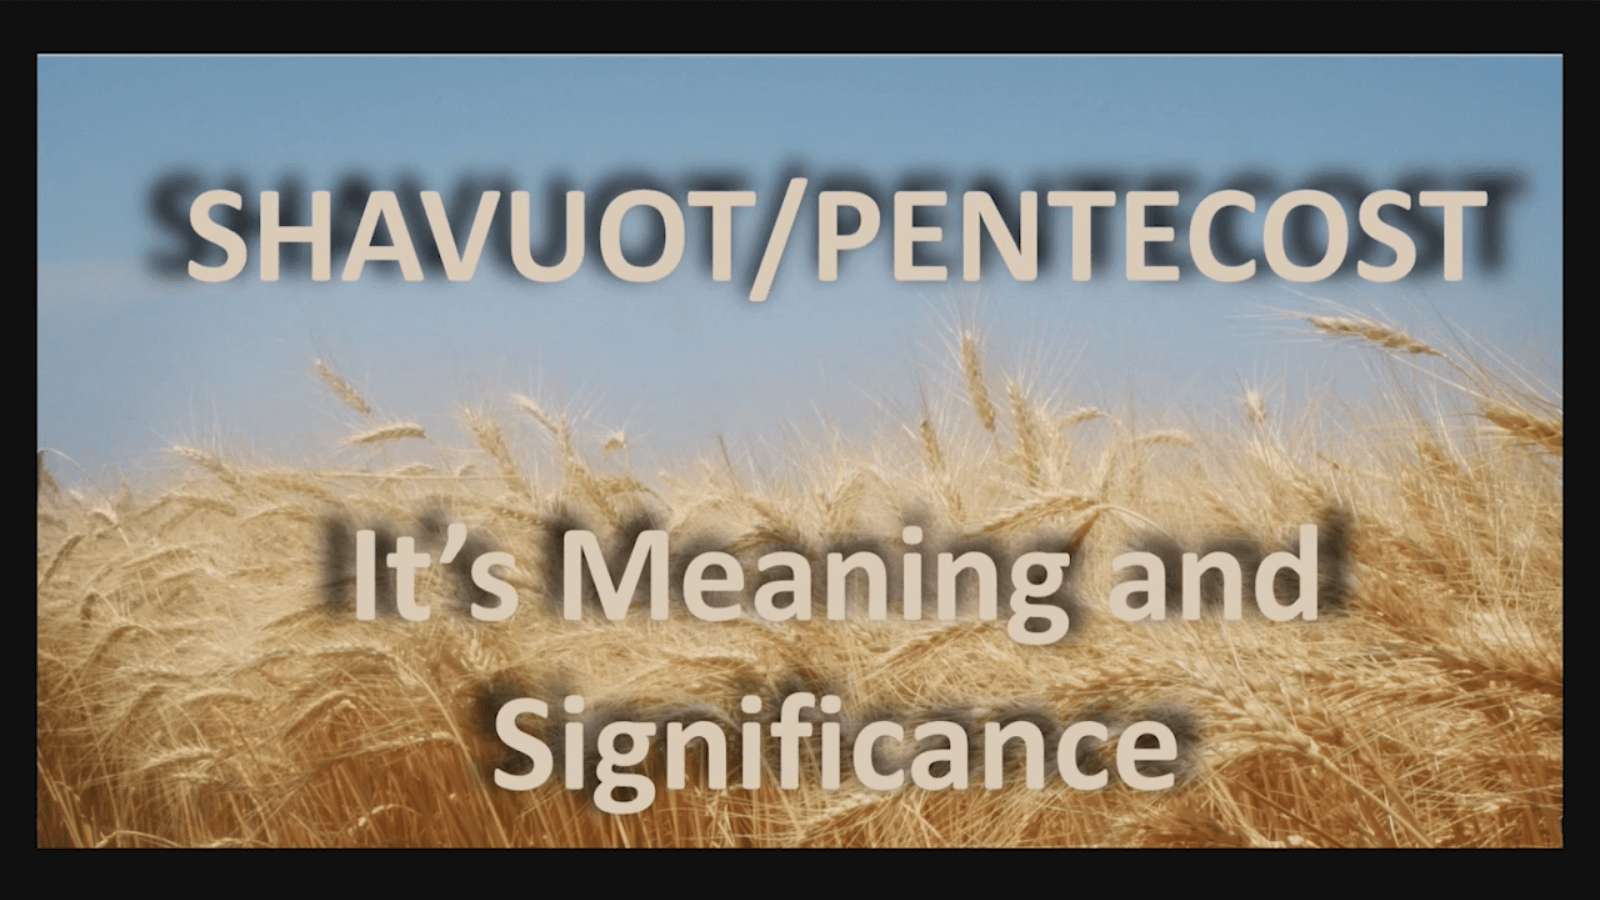 Shavuot/Pentecost Its Meaning and Significance (2018)